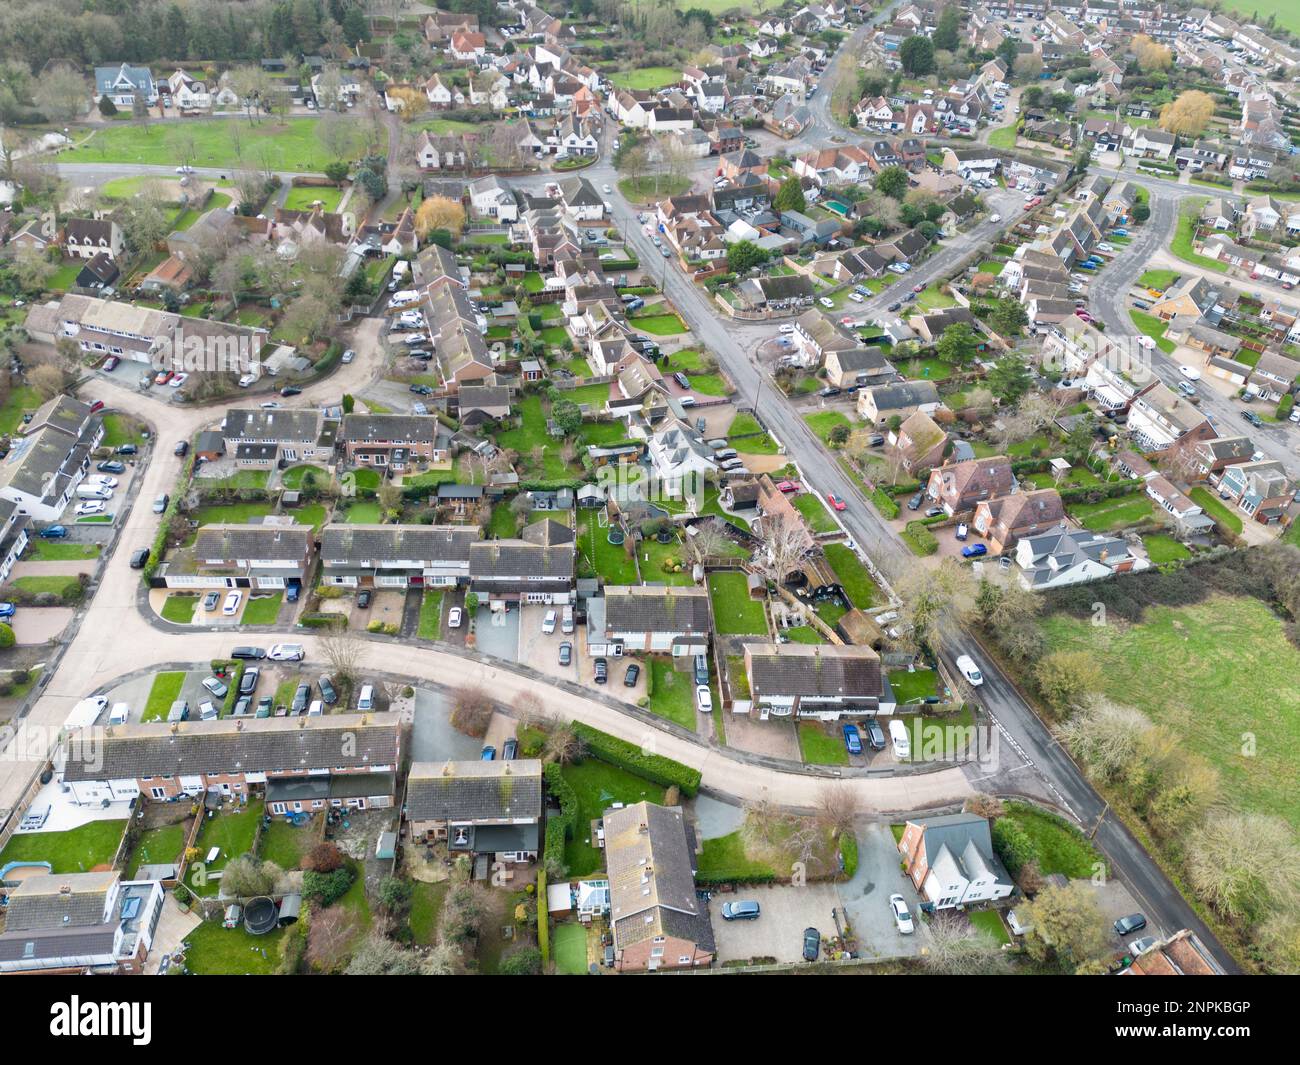 Aerial view of a typical English village showing housing development expansion over the years. Stock Photo